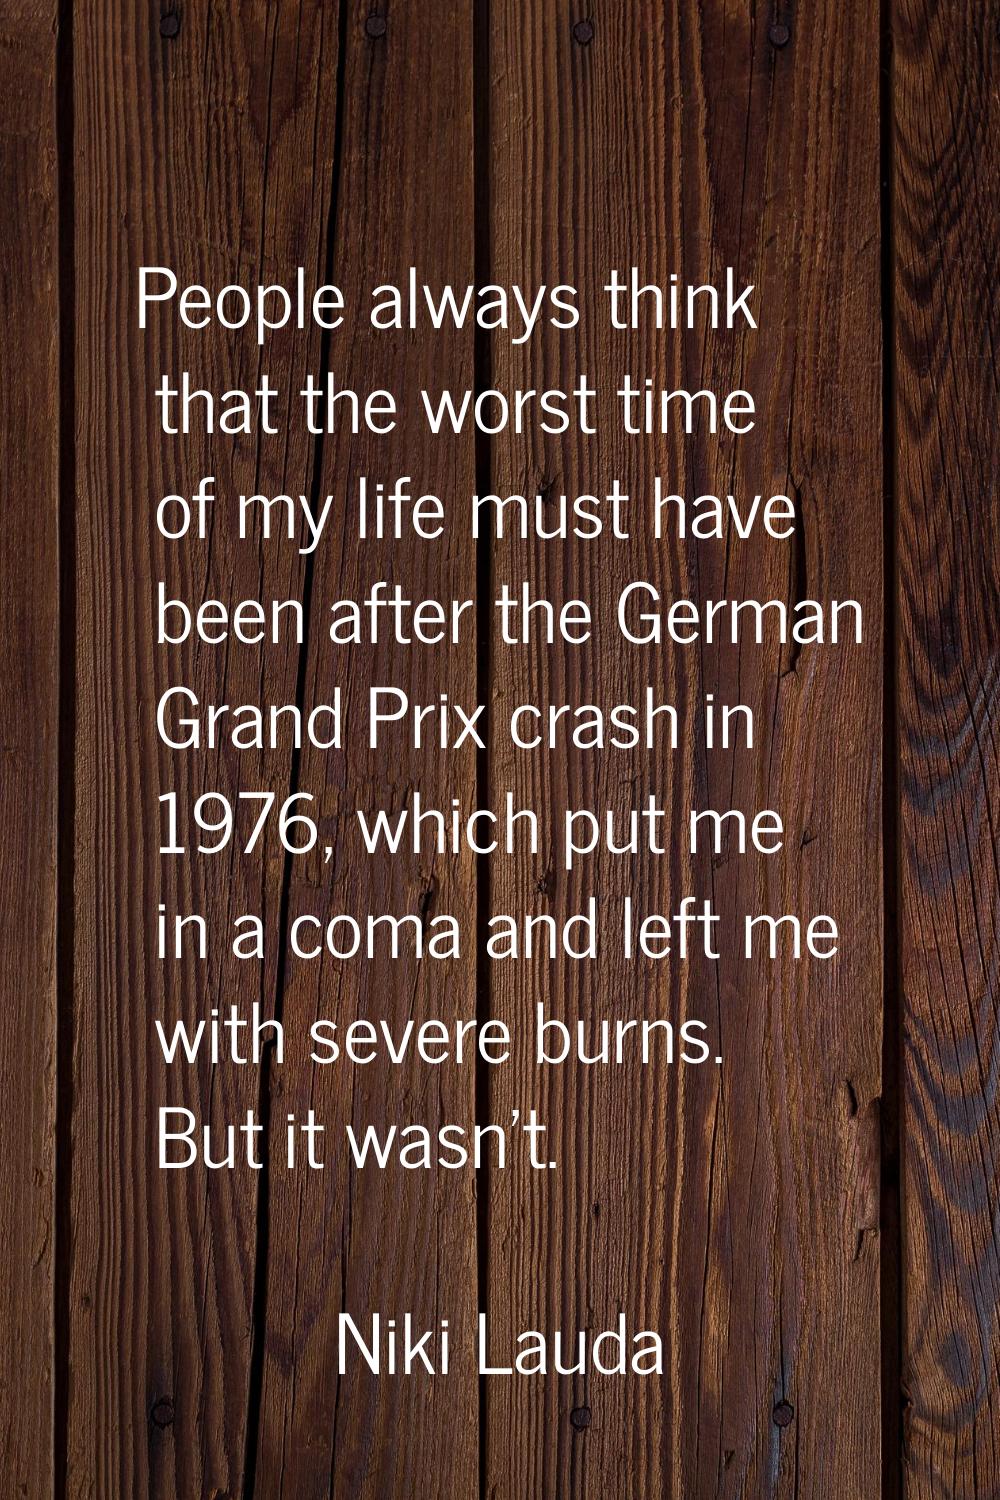 People always think that the worst time of my life must have been after the German Grand Prix crash